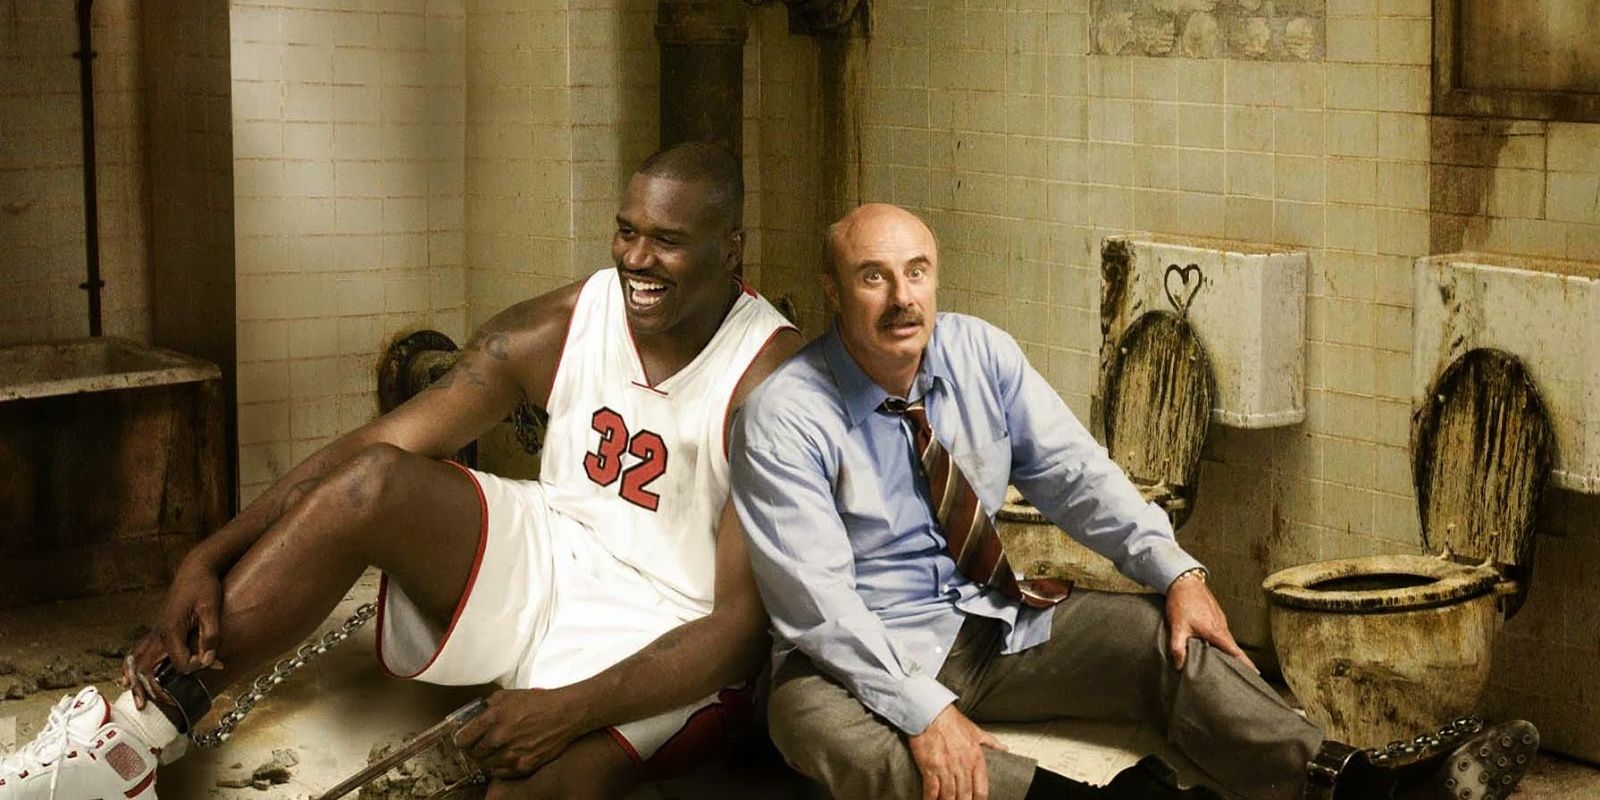 Shaq and Dr. Phil chained up ina bathroom in Scary Movie 4